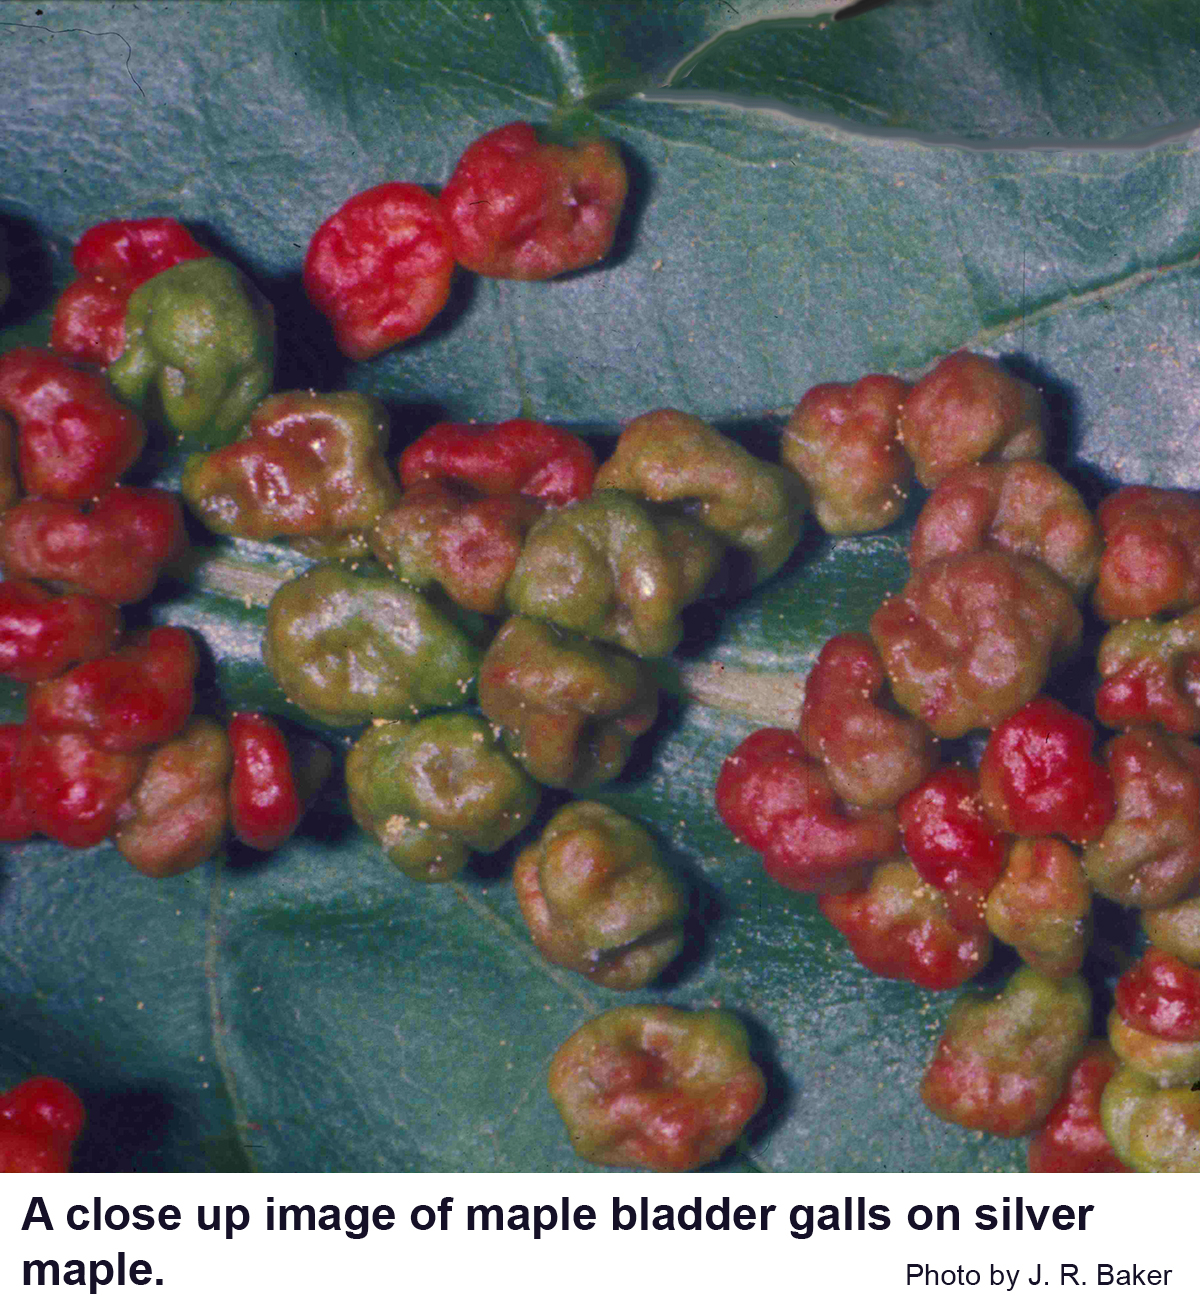 Maple bladder galls are well named!